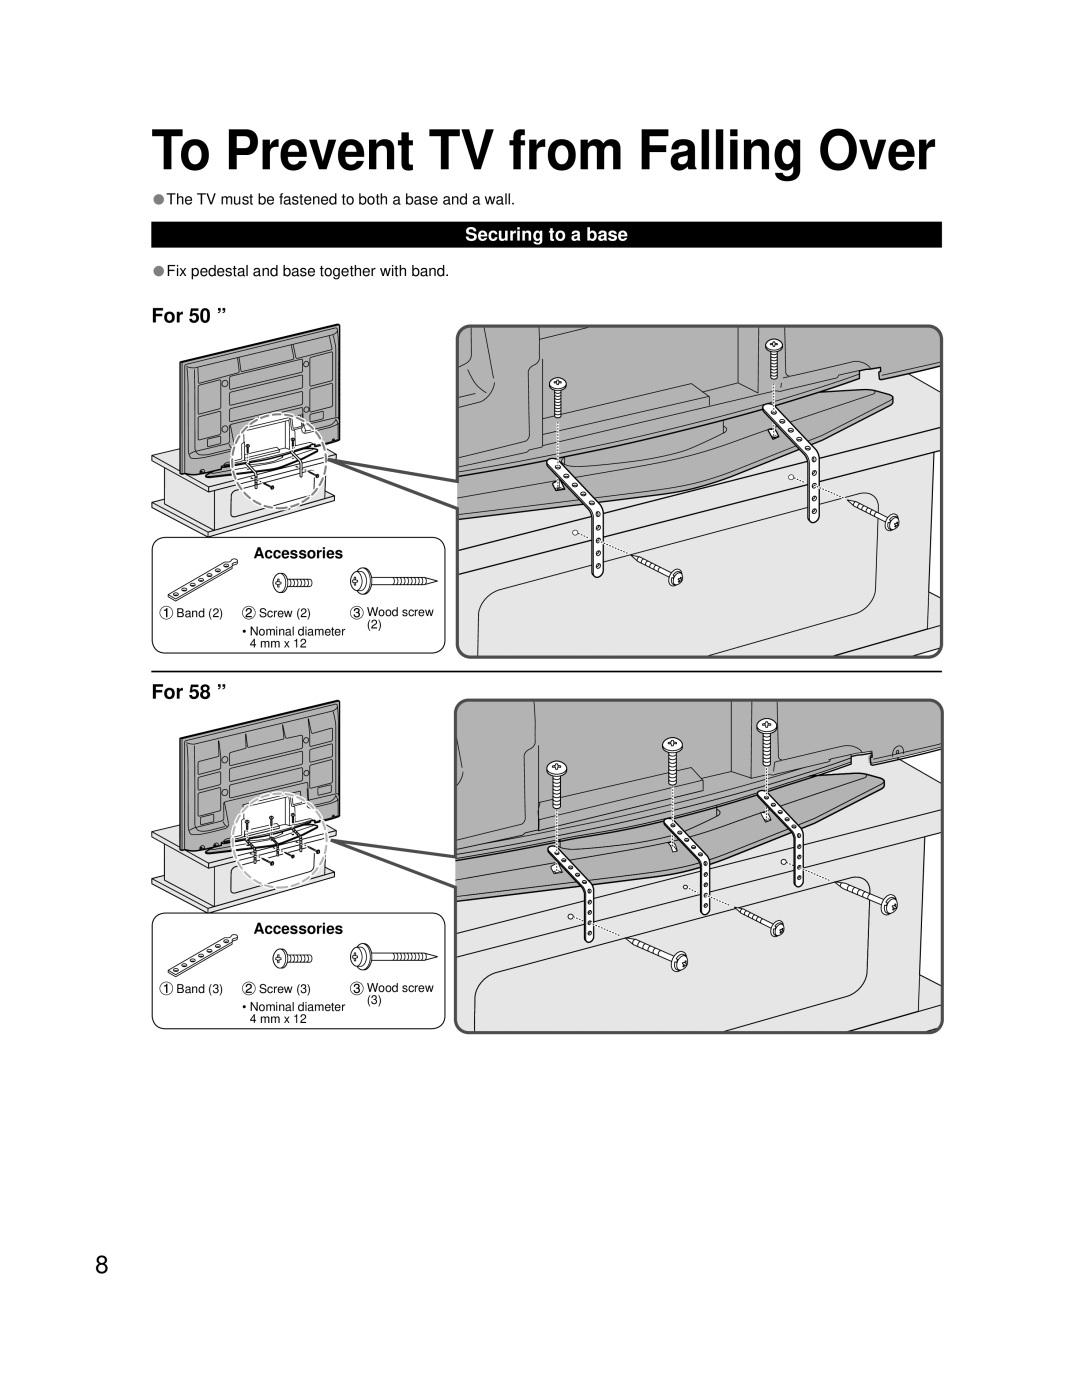 Panasonic TH 58PZ700U To Prevent TV from Falling Over, For 50 ”, For 58 ”, Securing to a base, Accessories, Wood screw 